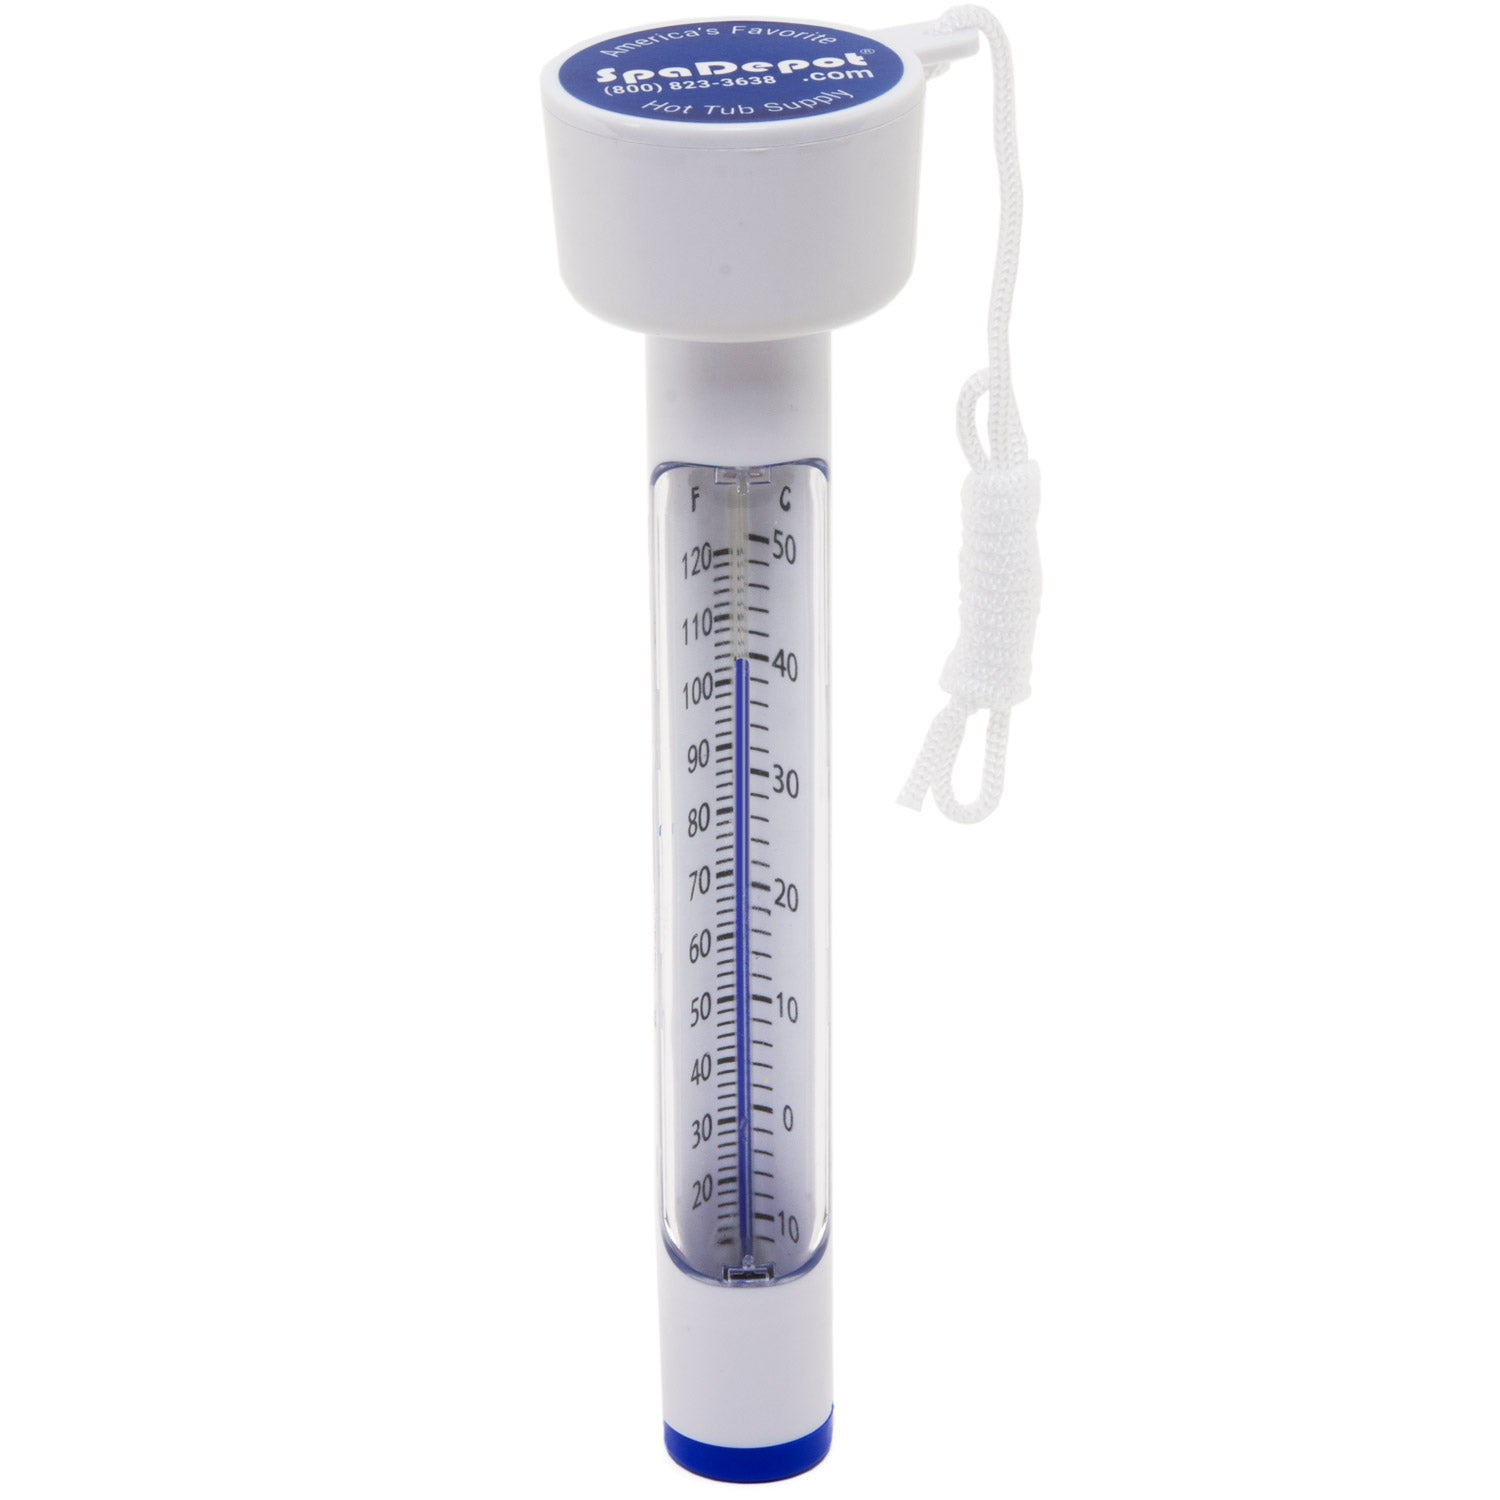 Deluxe Floating Spa & Pool Thermometer –